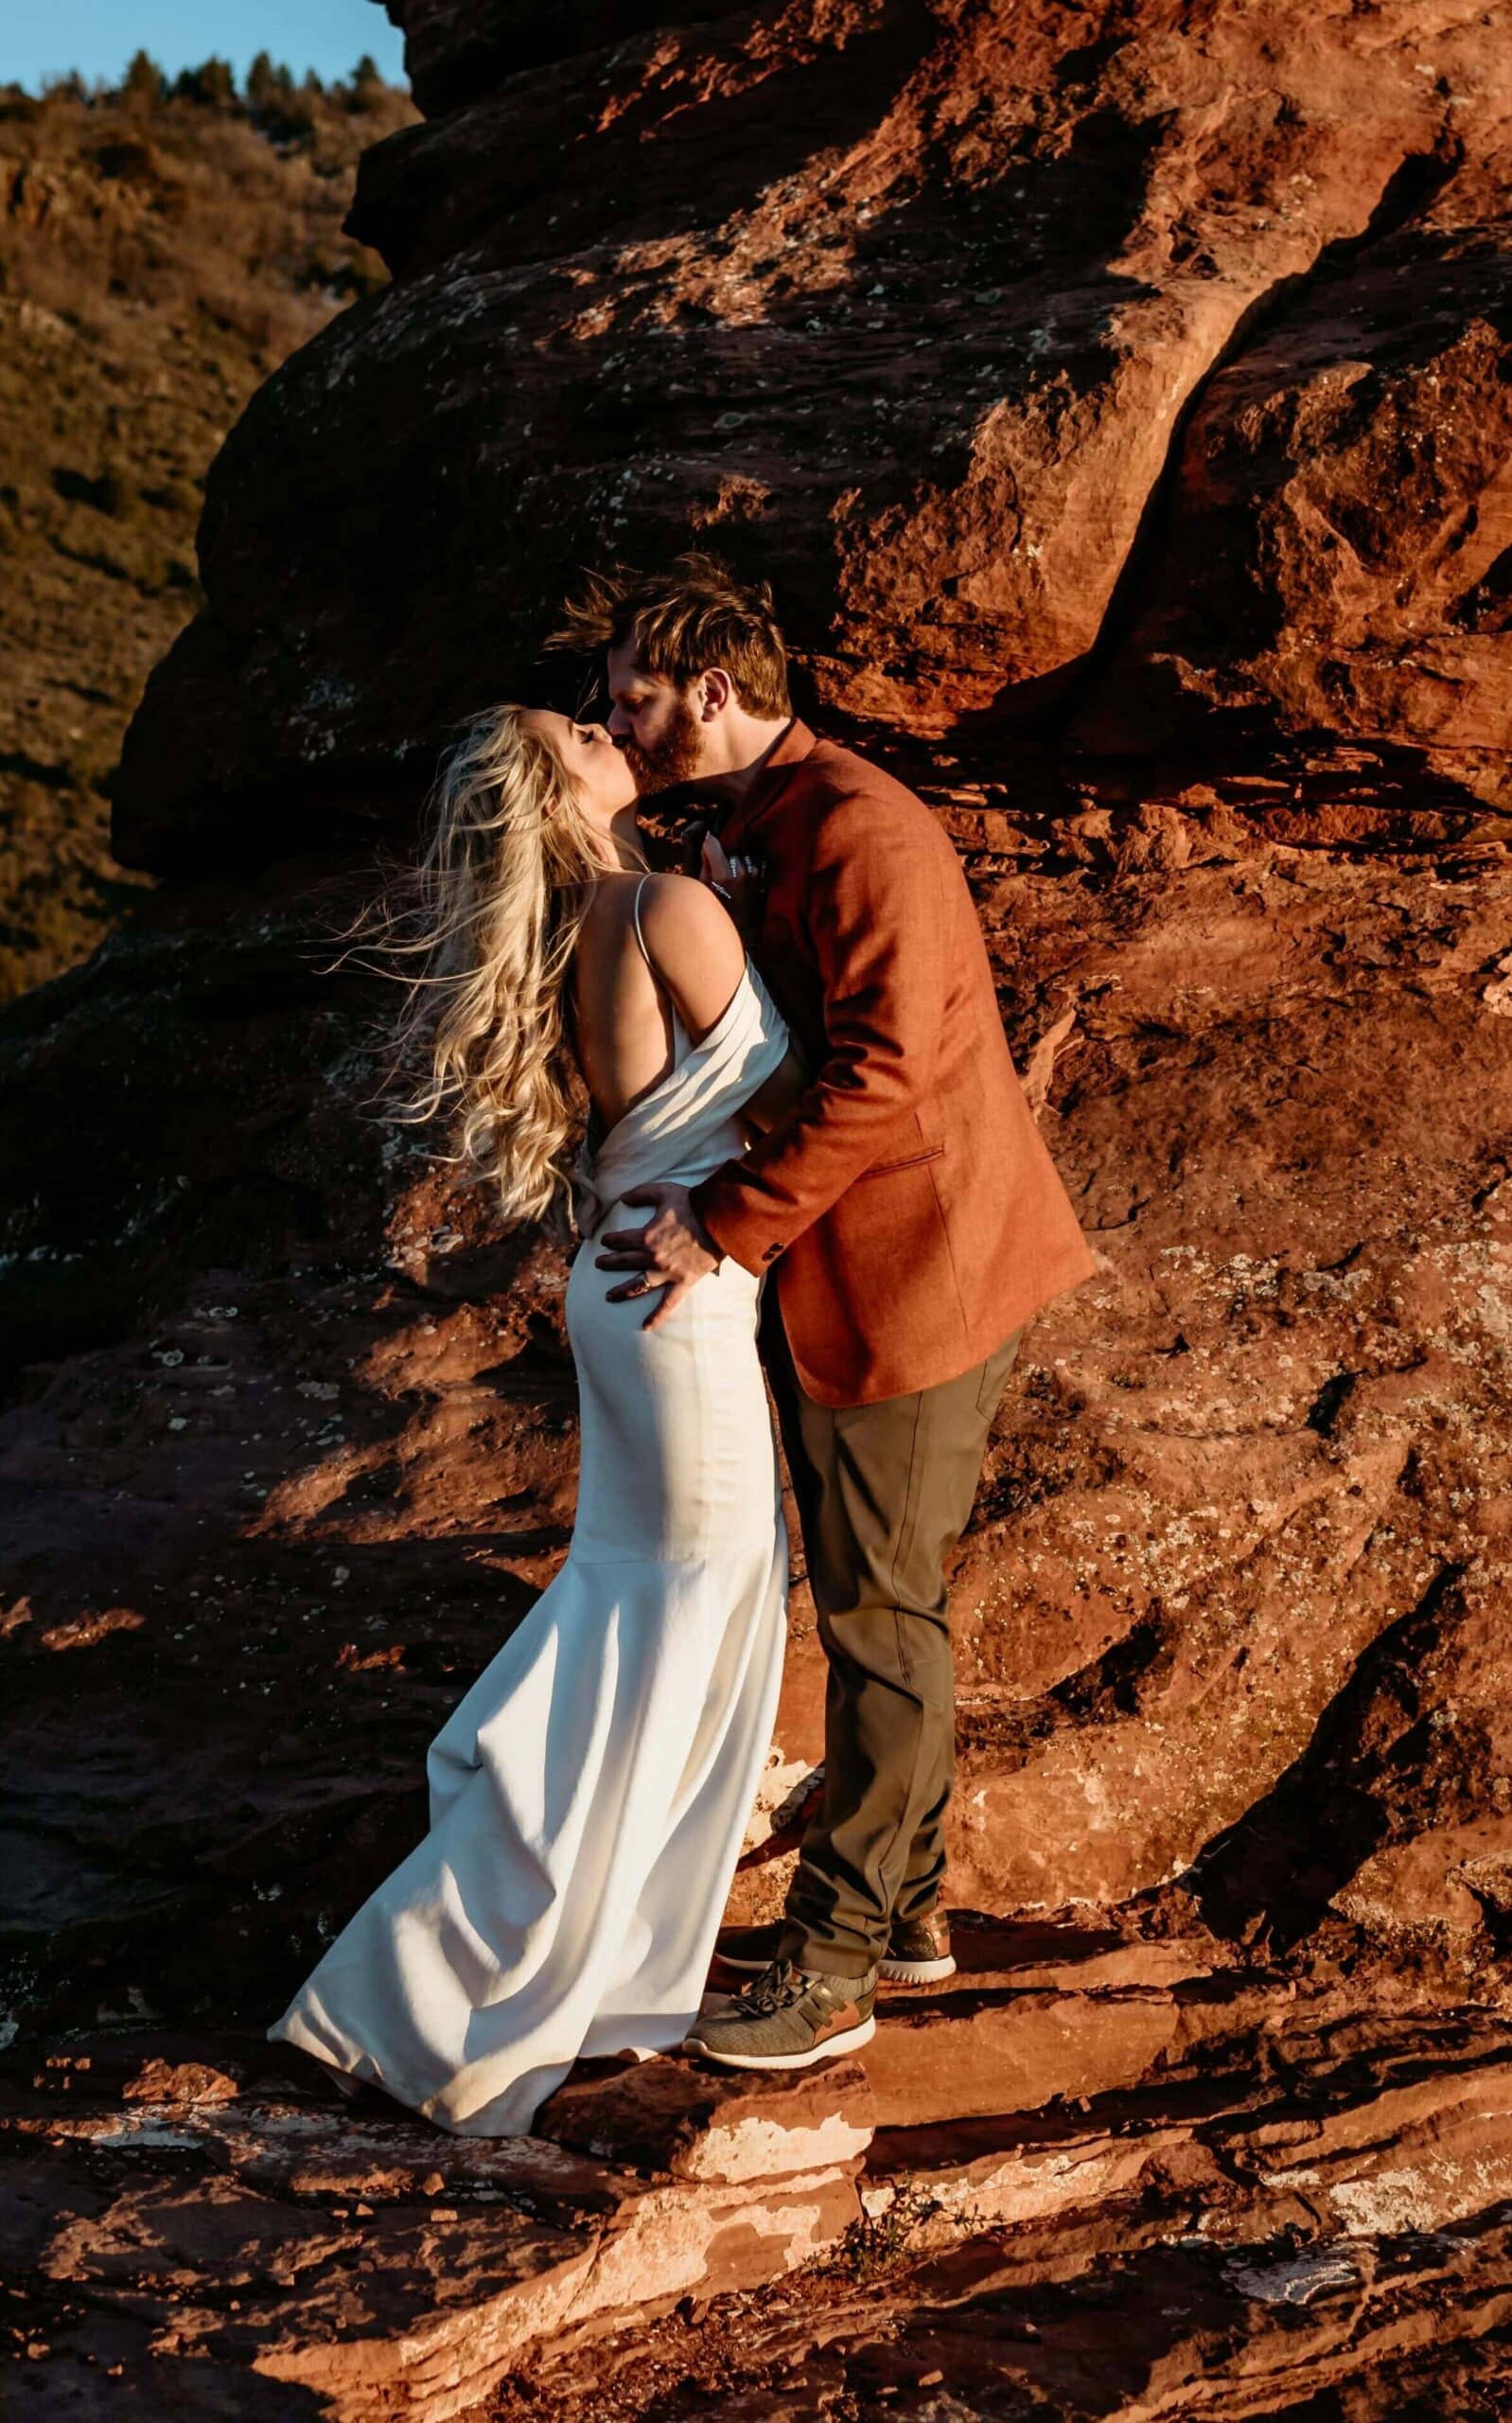 Bride and groom in a windblown kiss embrace during their Sedona elopement